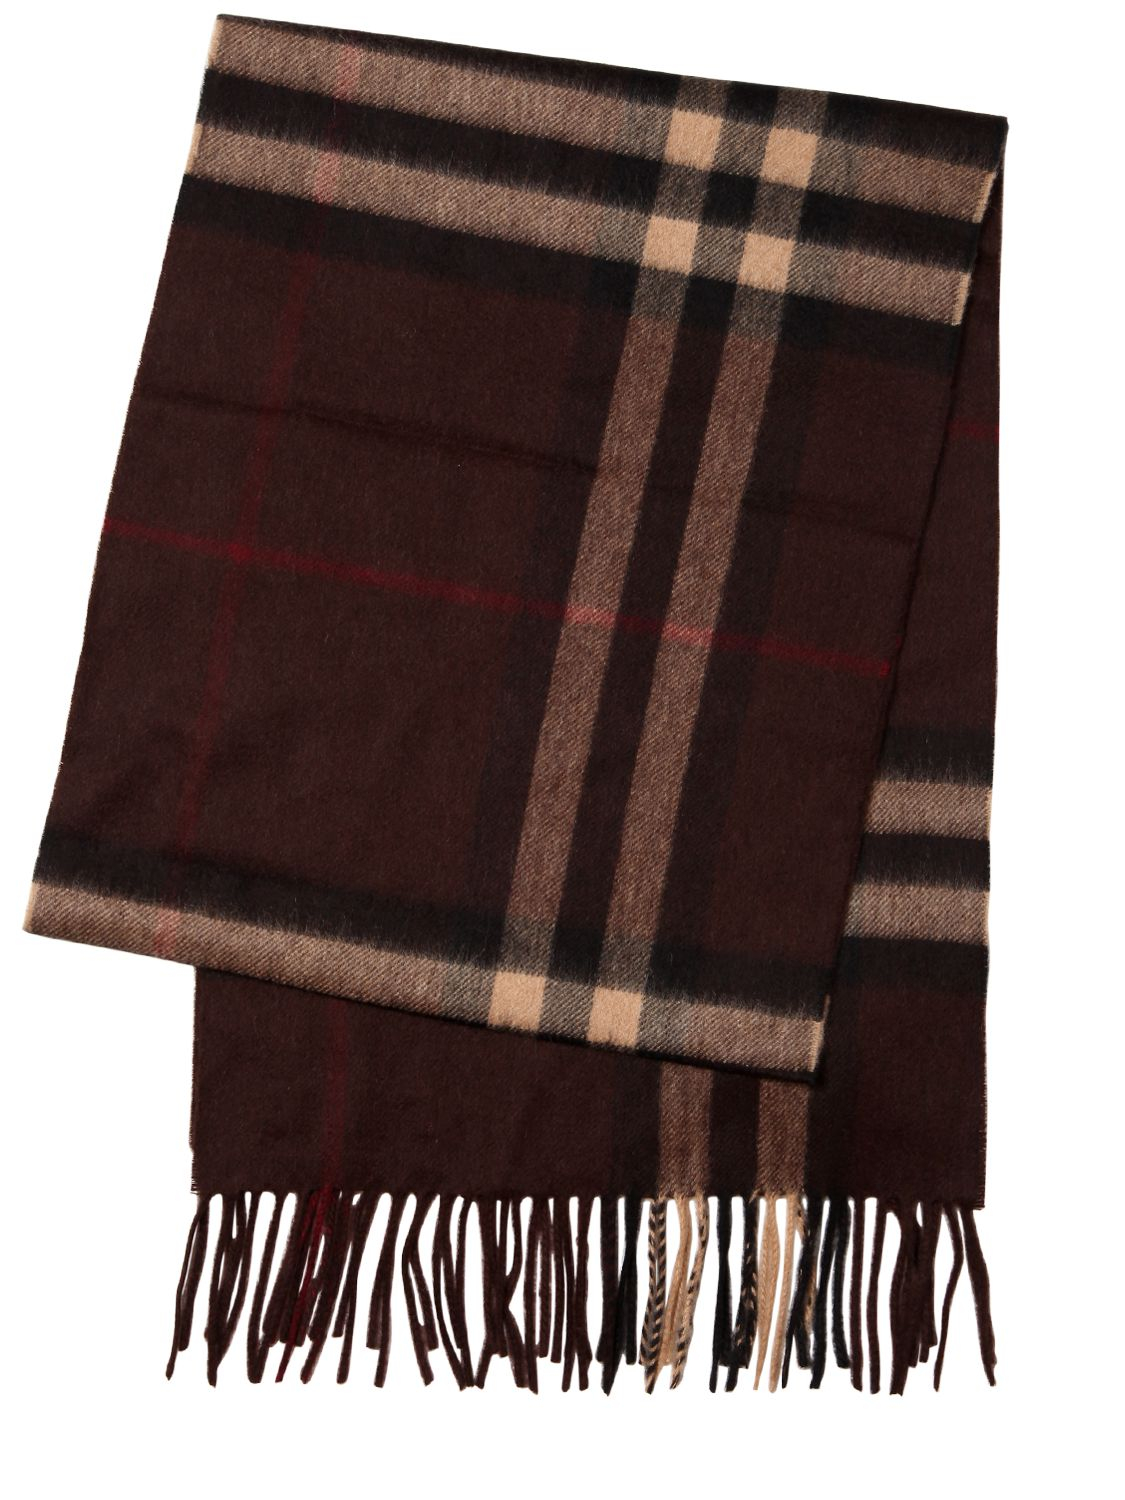 Lyst - Burberry Giant Check Pattern Cashmere Scarf in Brown for Men